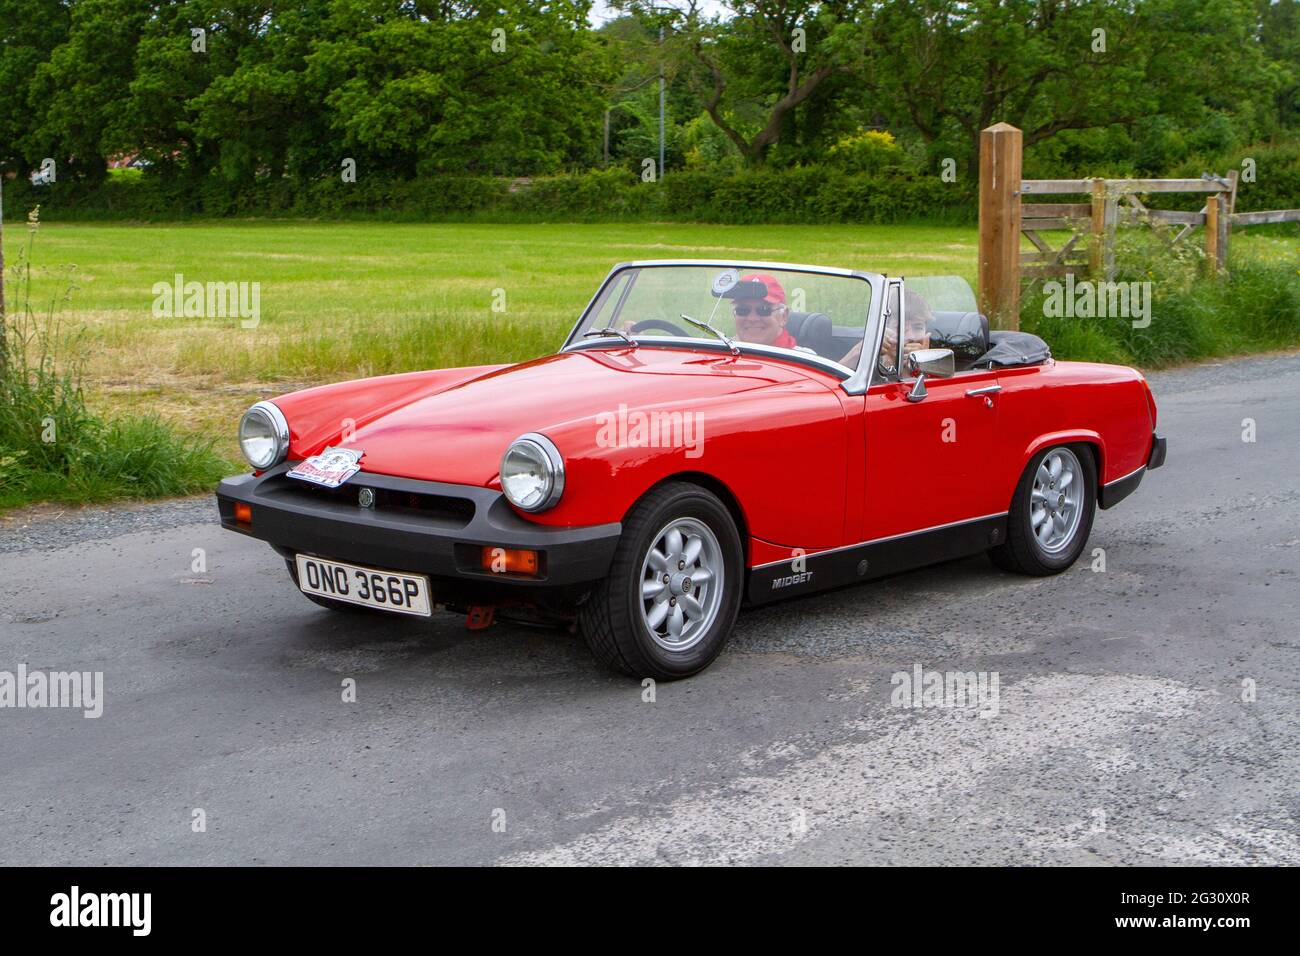 A 1976 PETROL MG MIDGET 1500 Annual Manchester to Blackpool Vintage & Classic Car Run The event is a ‘Touring Assembly’ Stock Photo